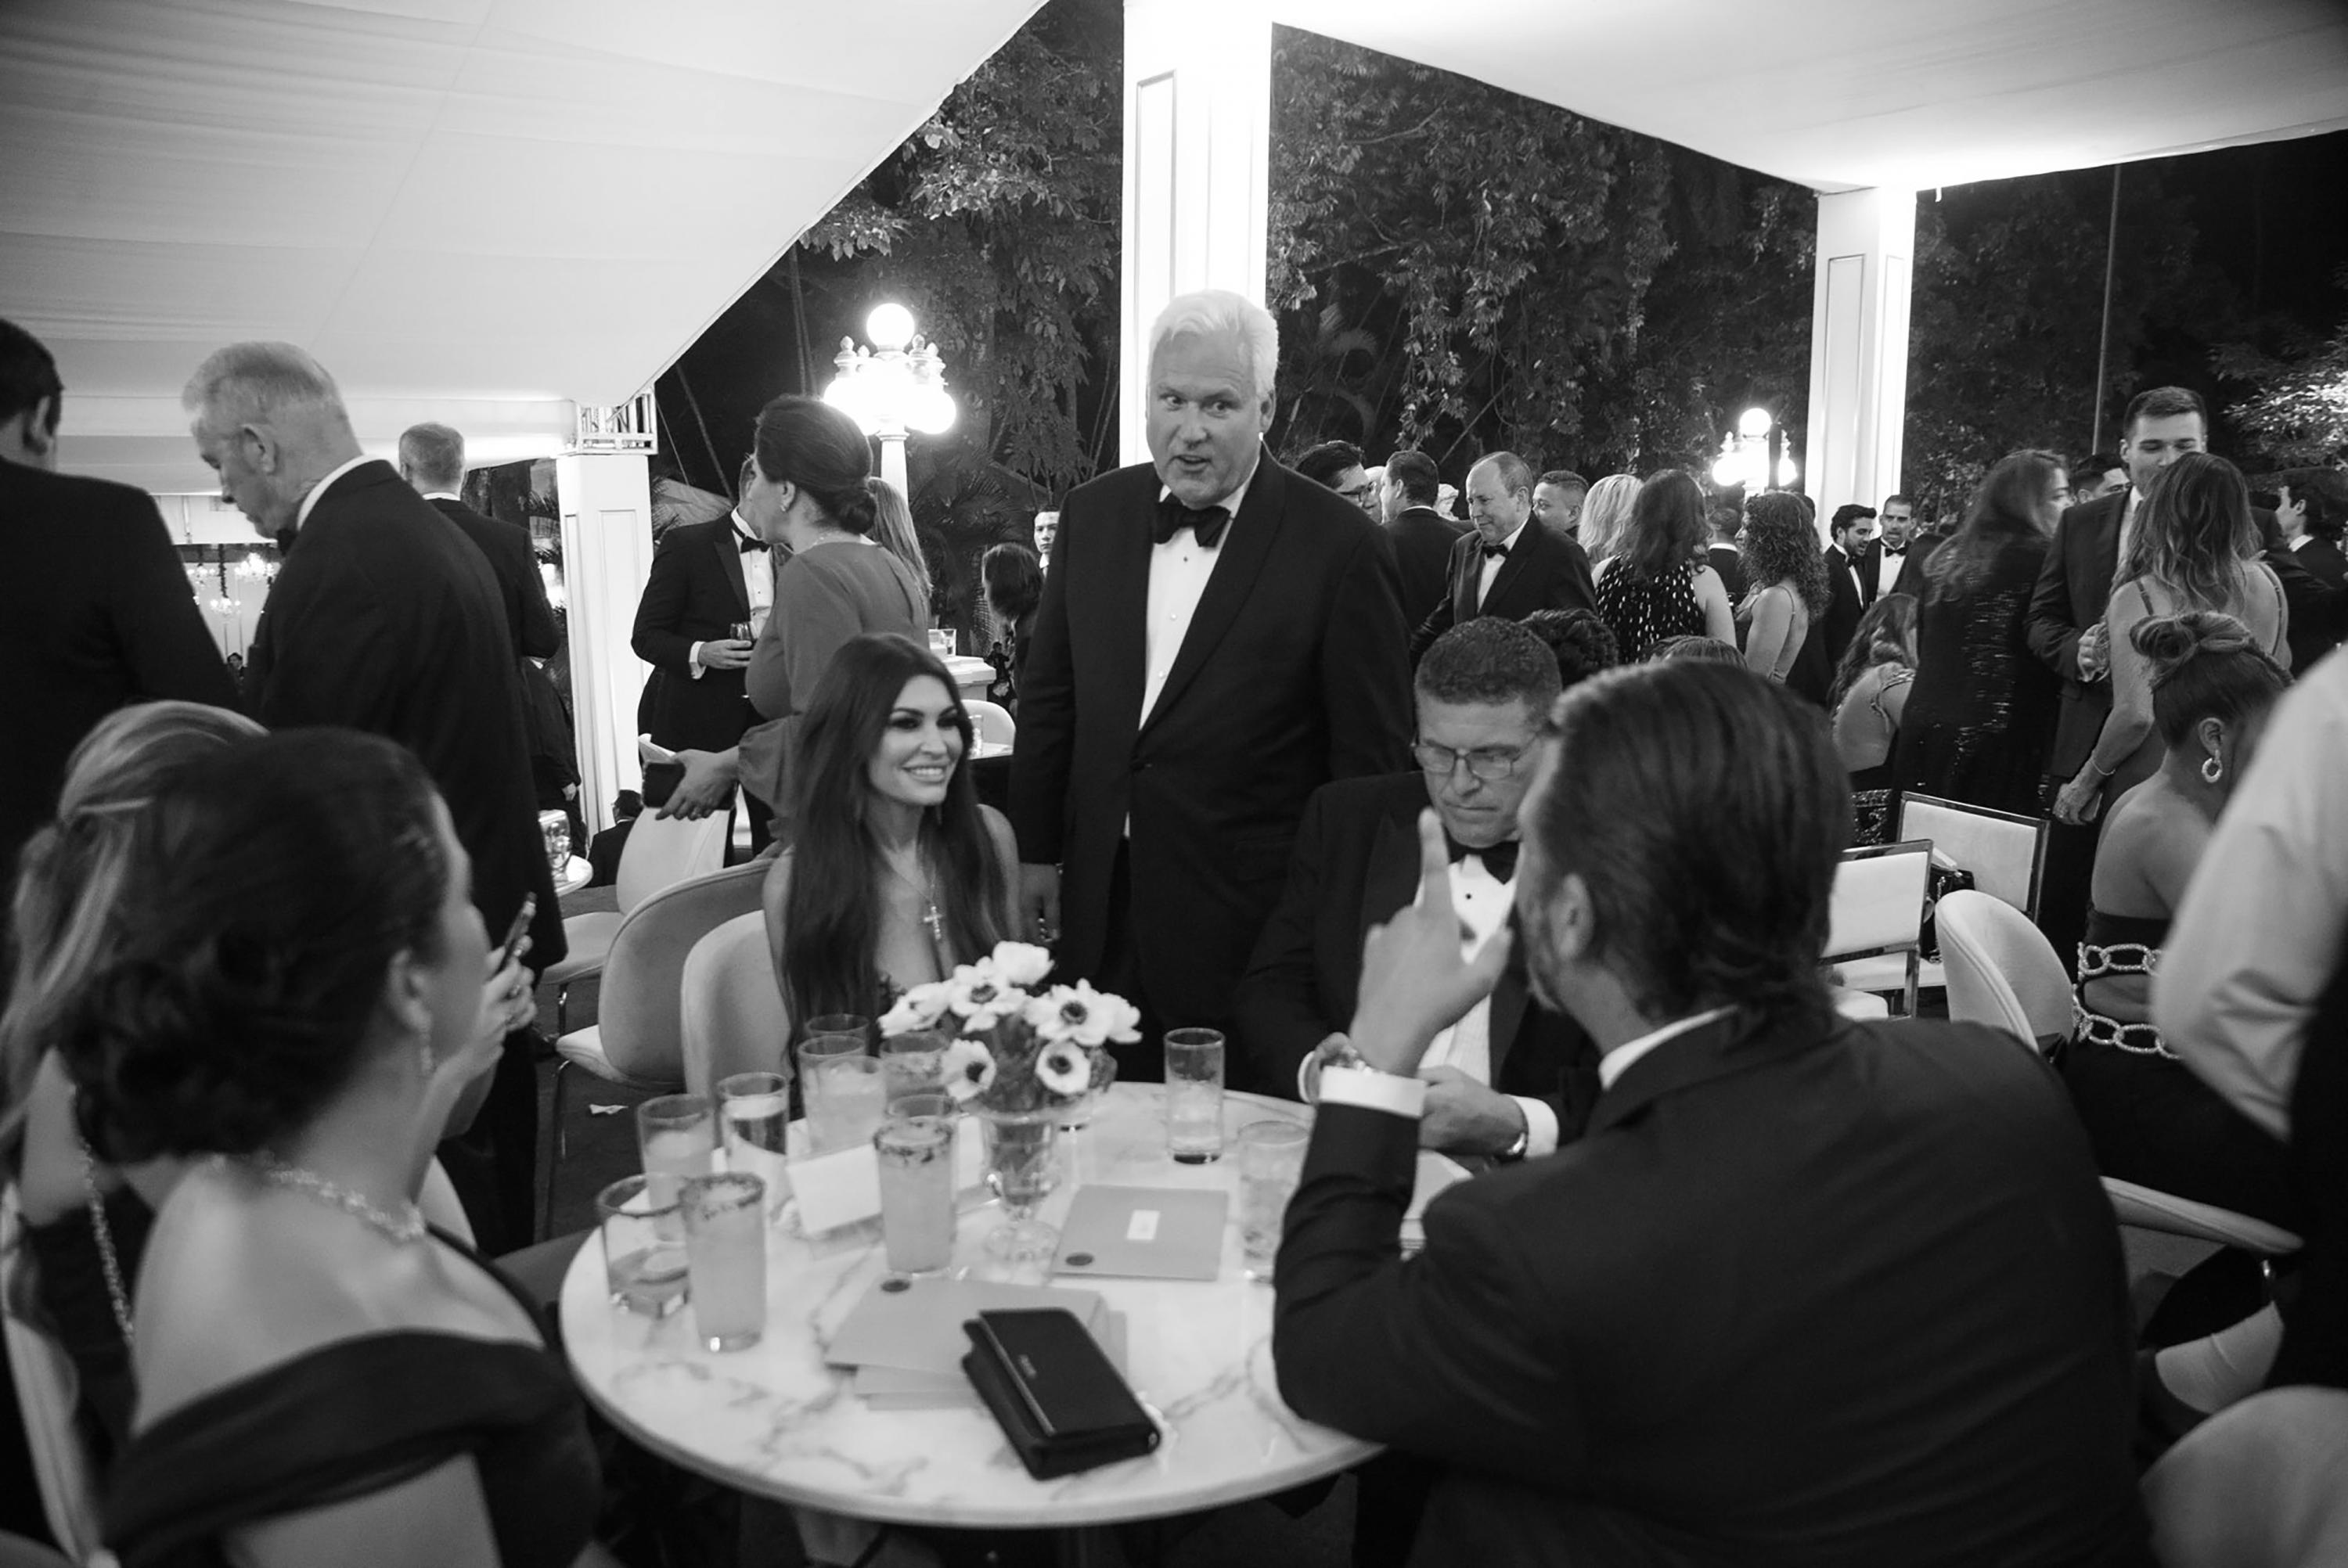 Donald Trump Jr (bottom-right), Damian Merlo (with glasses), Matt Schlapp (standing), and Kimberly Guilfoyle (center-left) in Casa Presidencial in San Salvador for a reception following the June 1 inauguration.